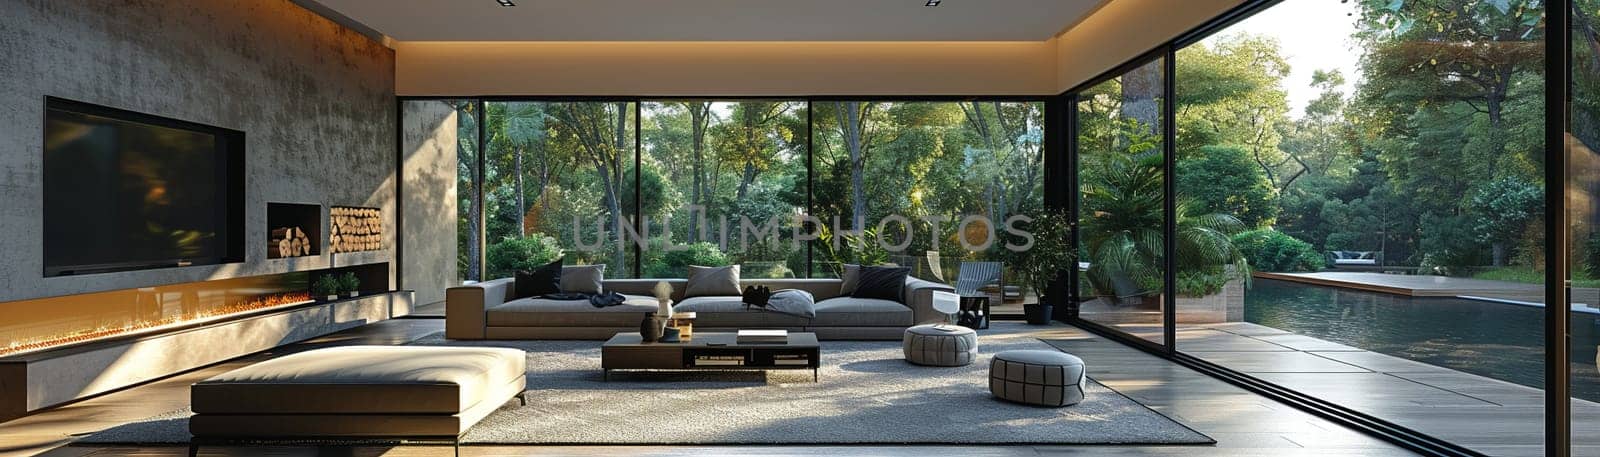 High-tech smart home living room with integrated technology and sleek furnitureup32K HD by Benzoix